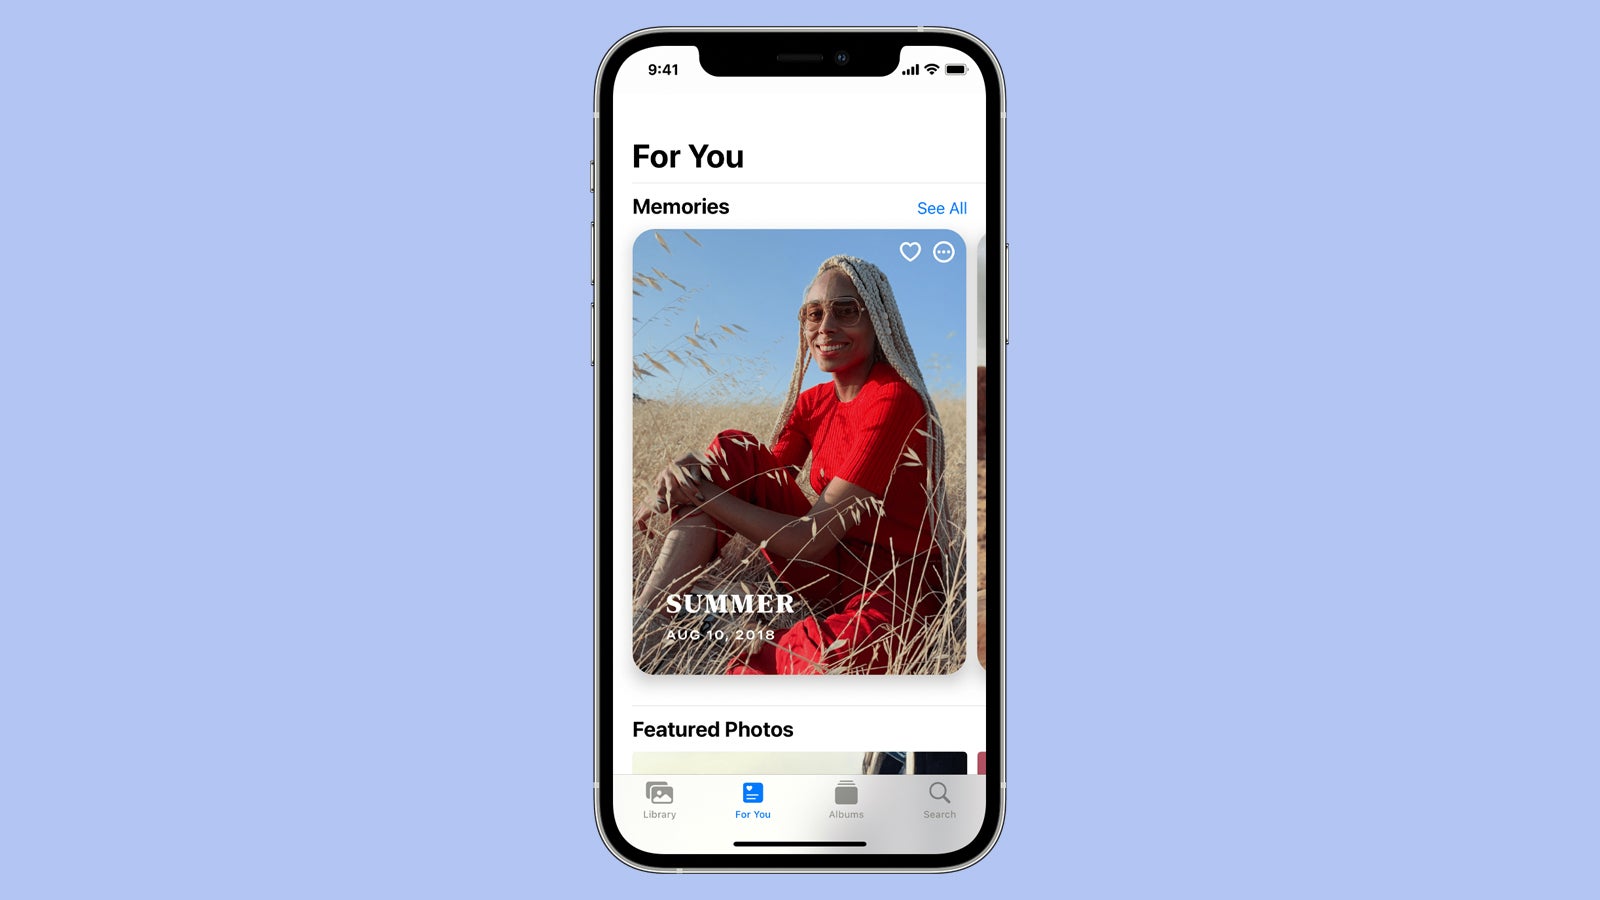 Apple Photos will curate Memories automatically for you. (Image: Apple)